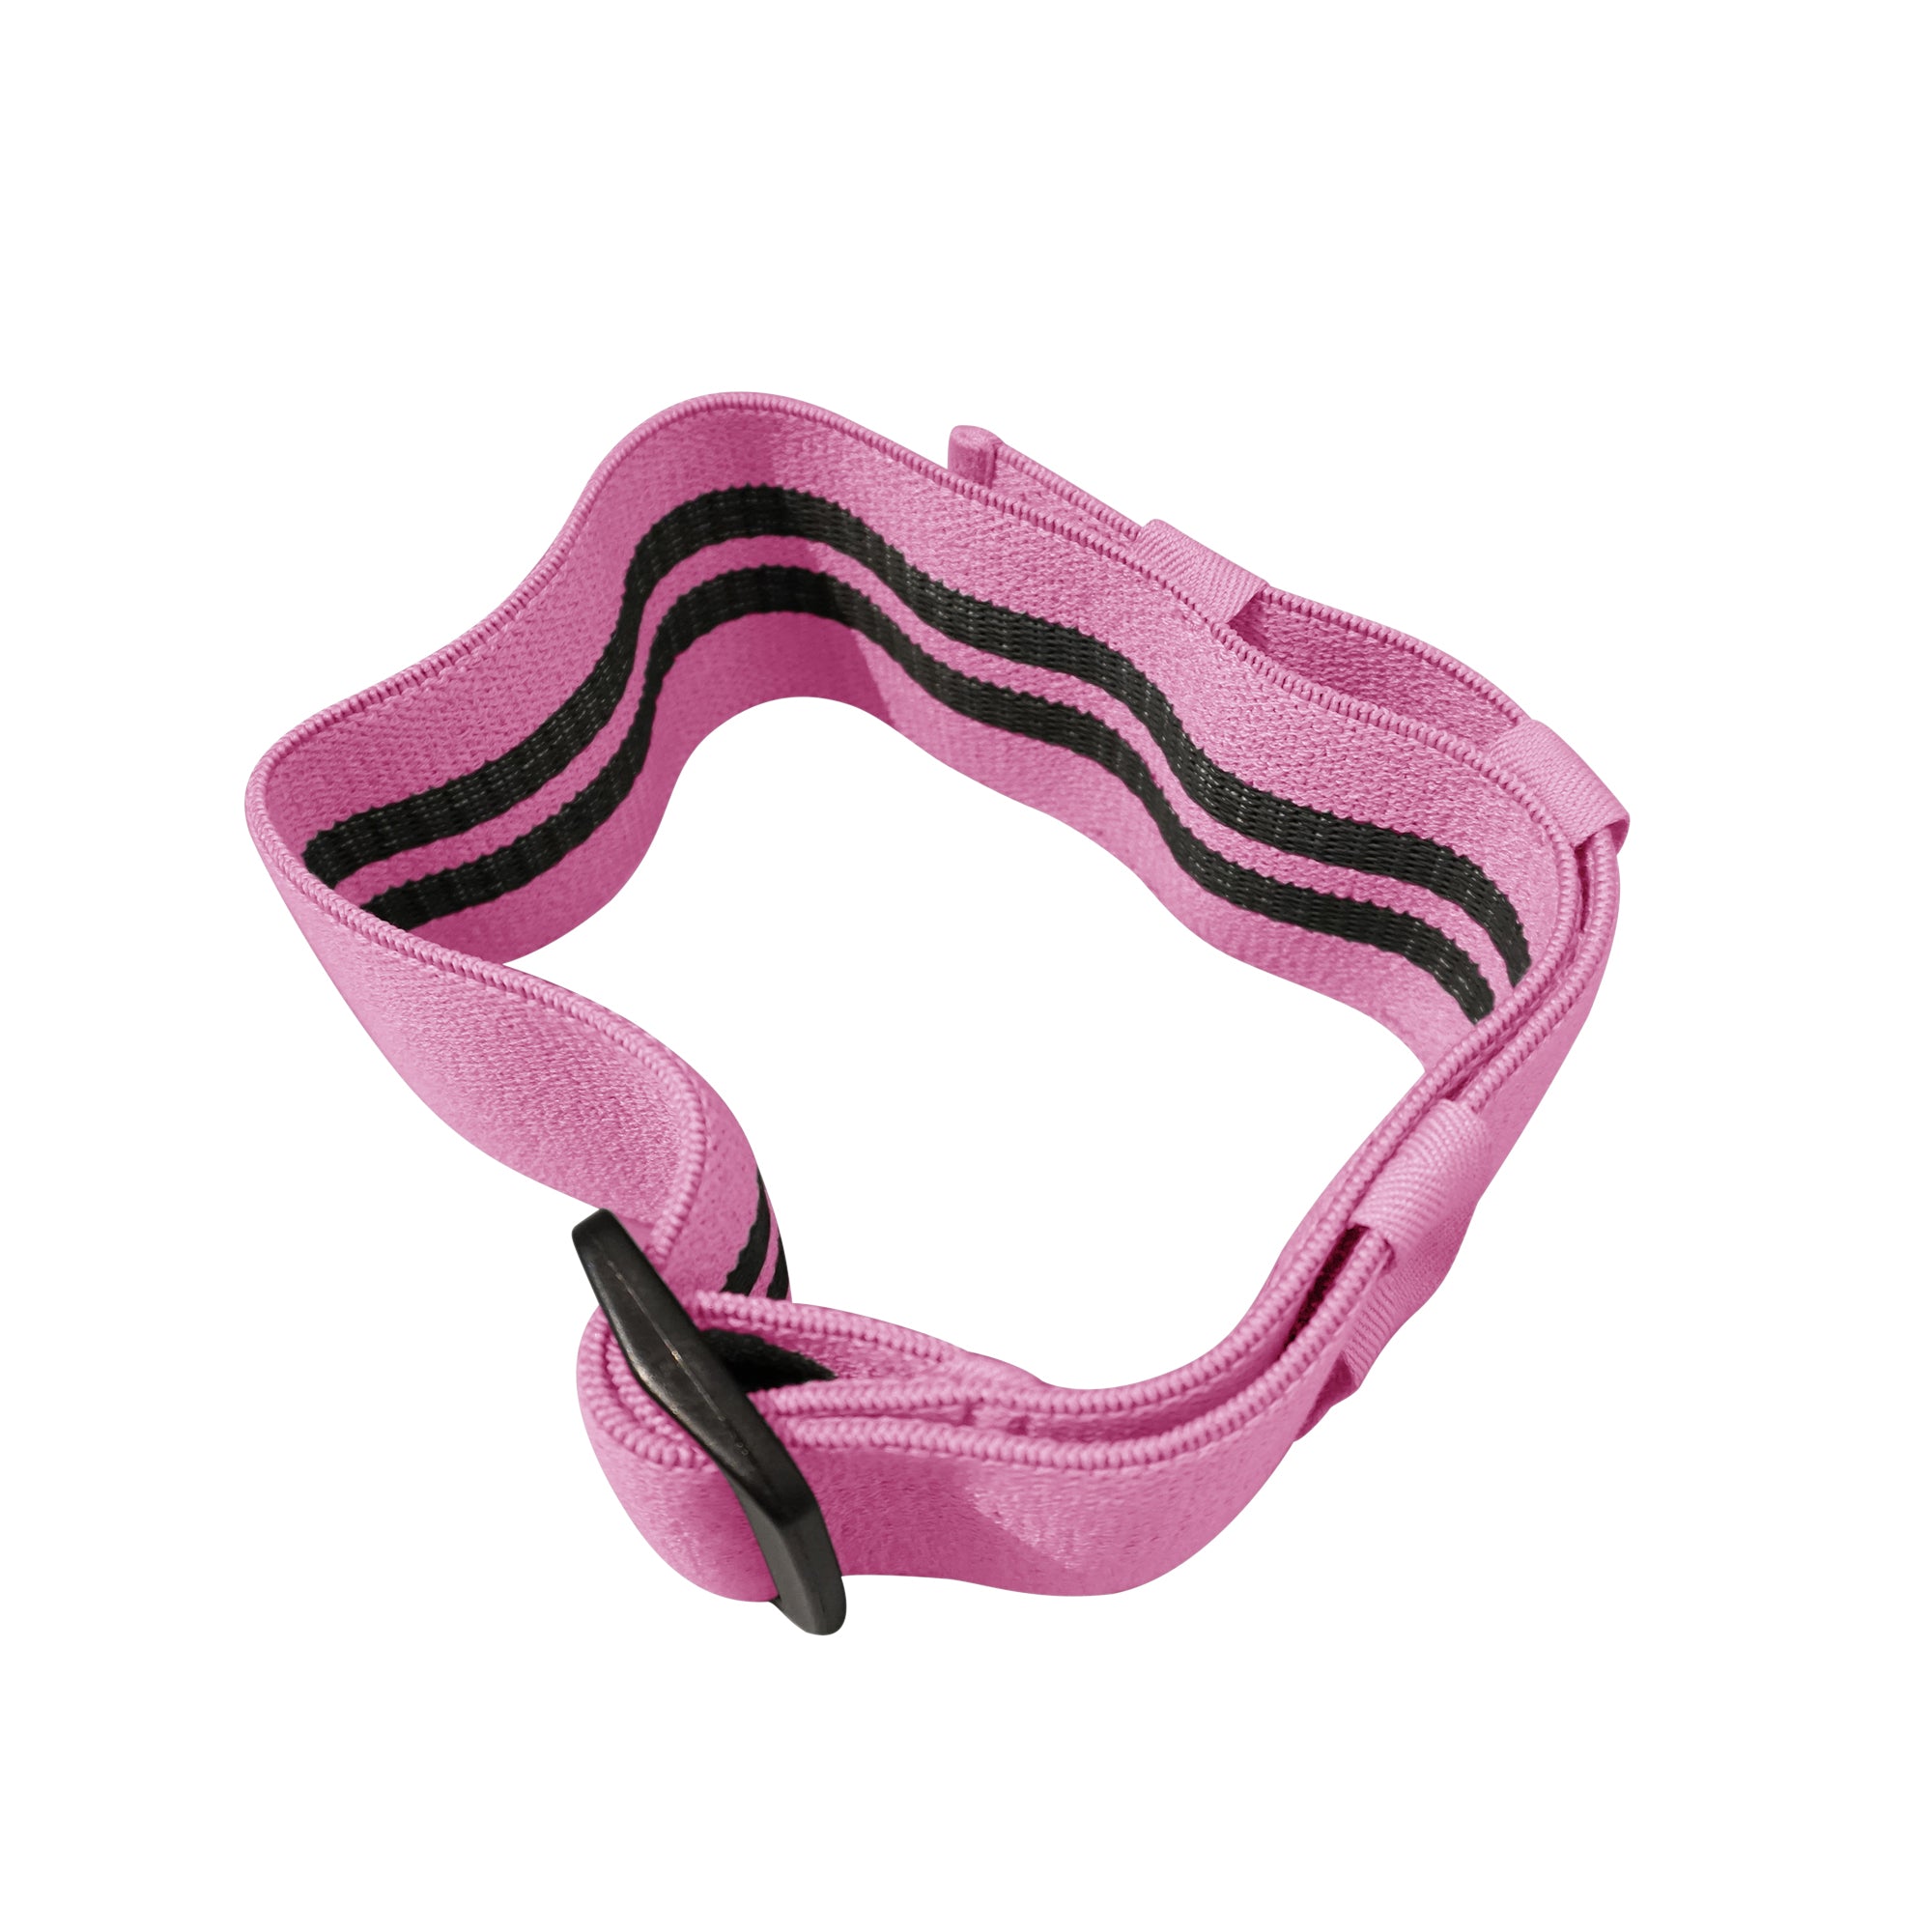 TNF Bands Adjustable Resistance Band (1 band) tnf-bands-adjustable-resistance-band-1-band Fitness Accessories Pink TNF Bands